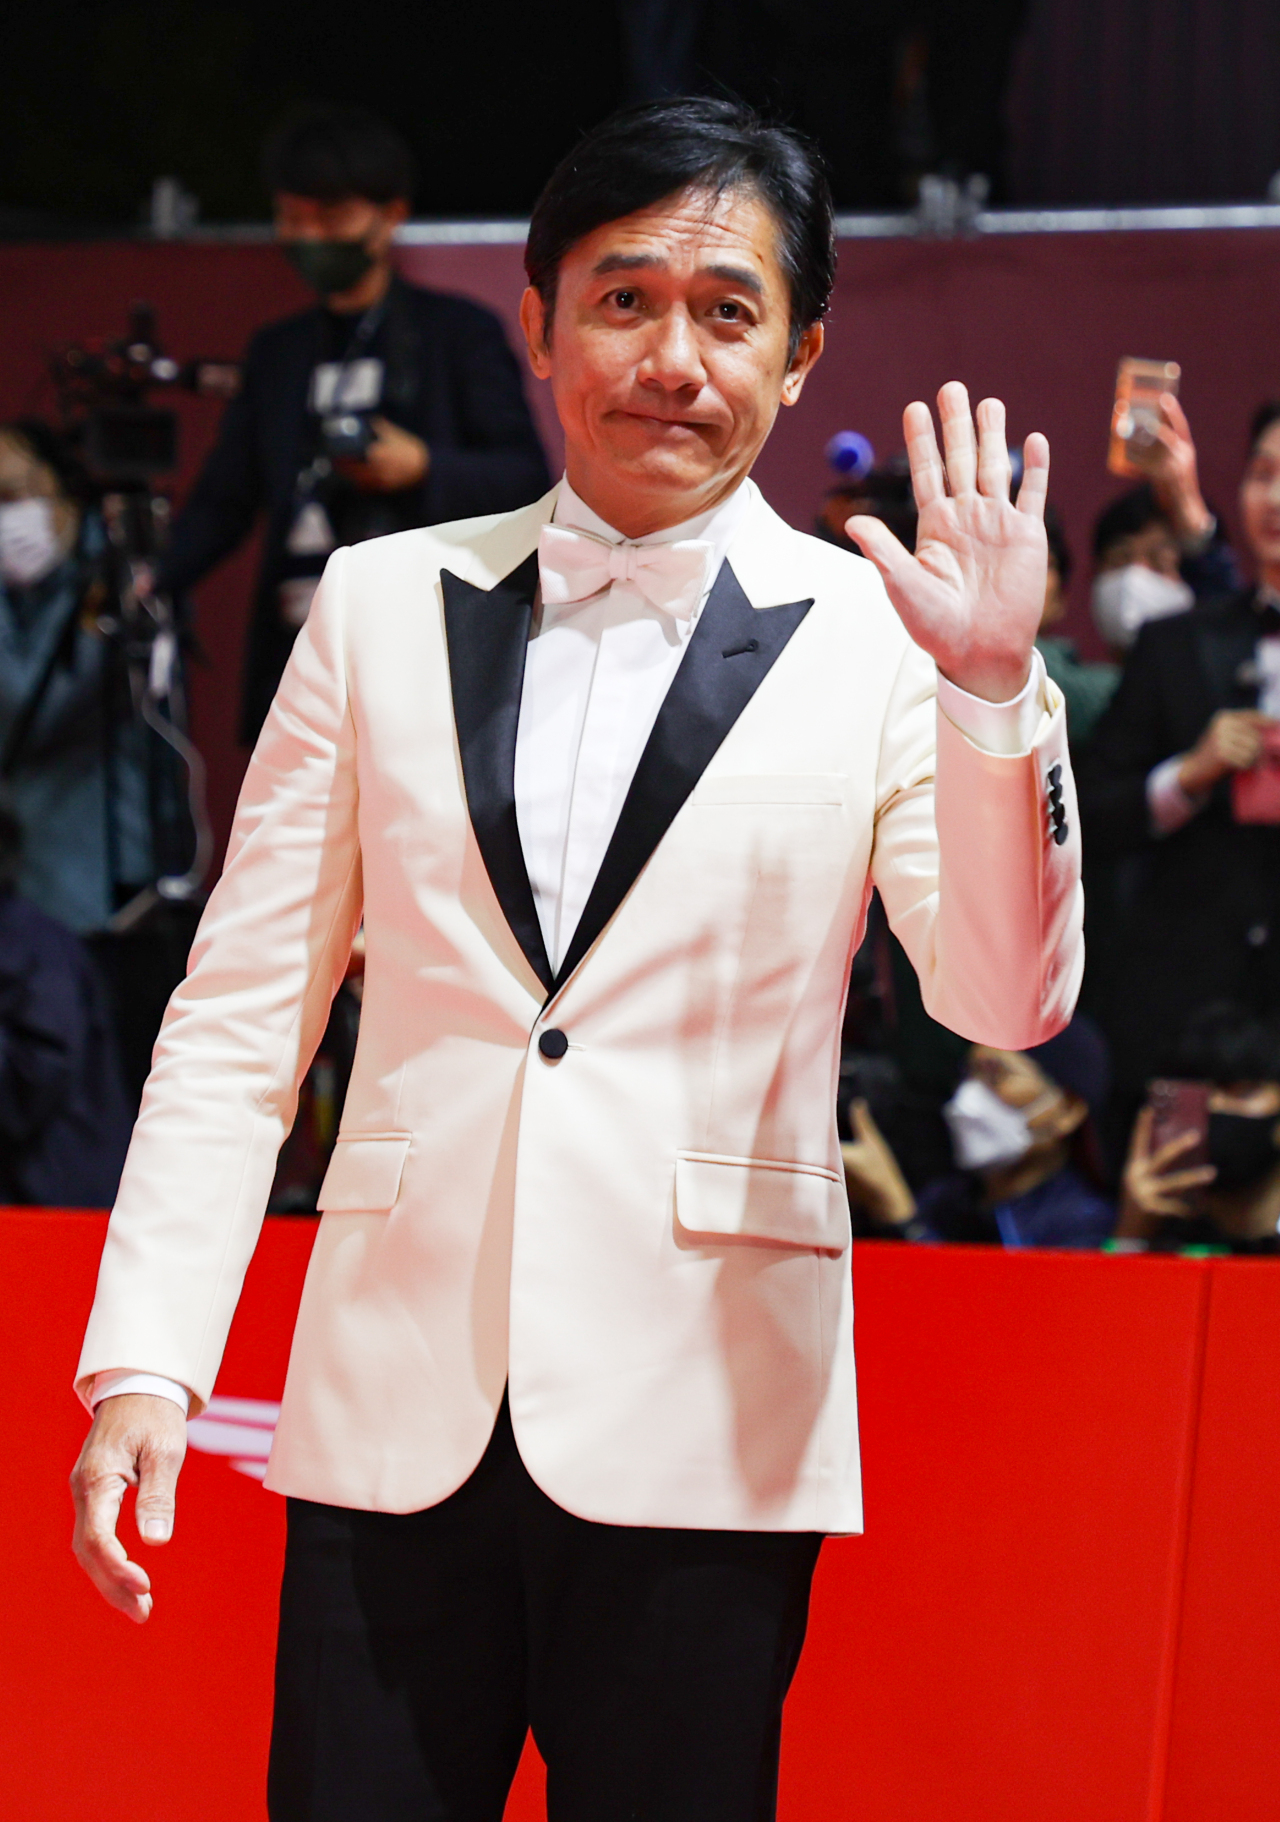 Hong Kong actor Tony Leung Chiu-wai poses for photos during the red carpet event of the 27th Busan International Film Festival on Wednesday at the Busan Cinema Center. (Yonhap)